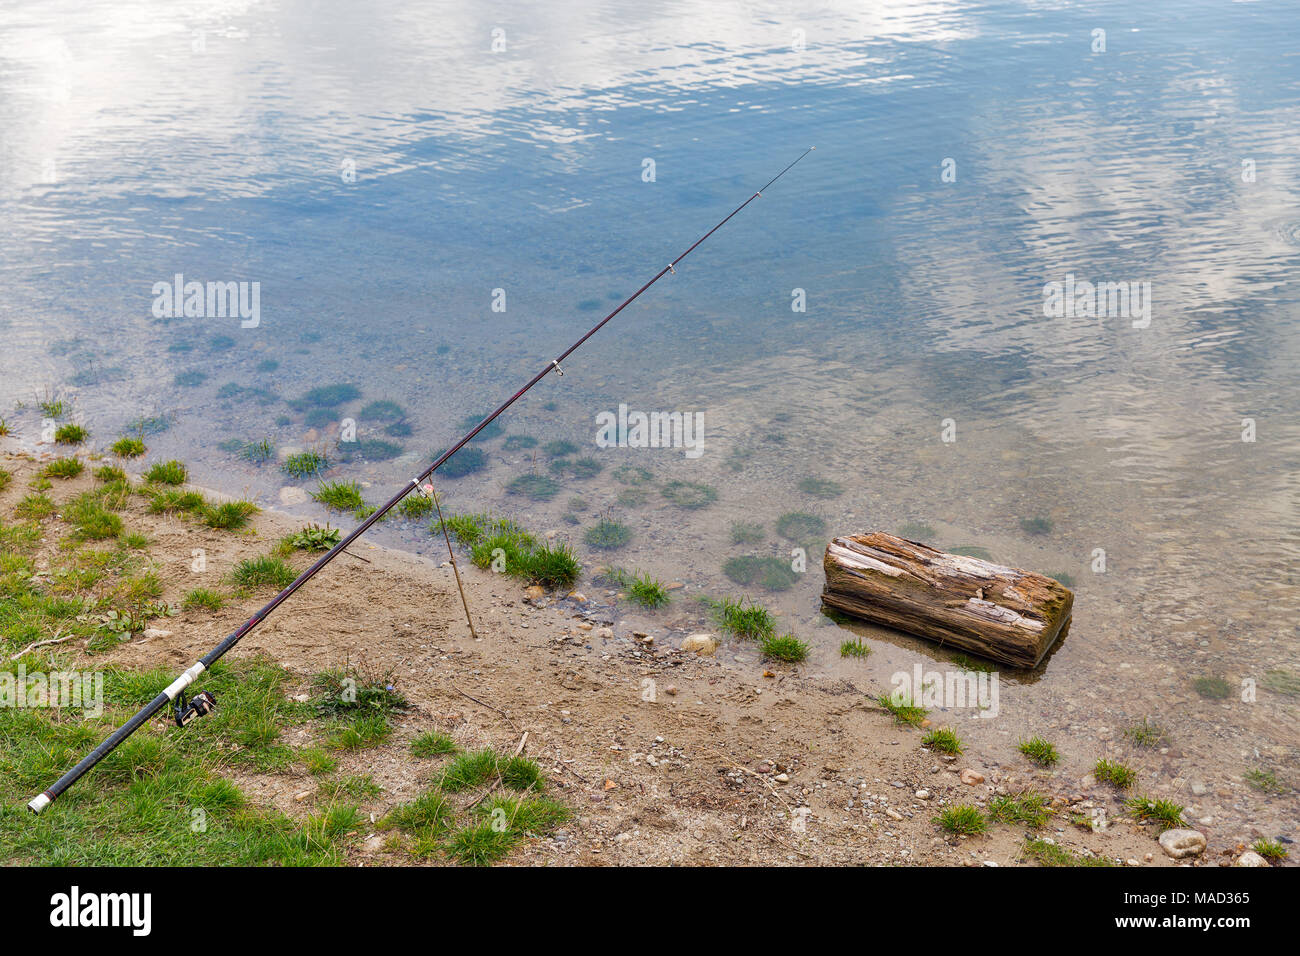 Several Telescoping Fishing Rods Lake Water Equipment at Concrete Dock  Stock Photo - Alamy